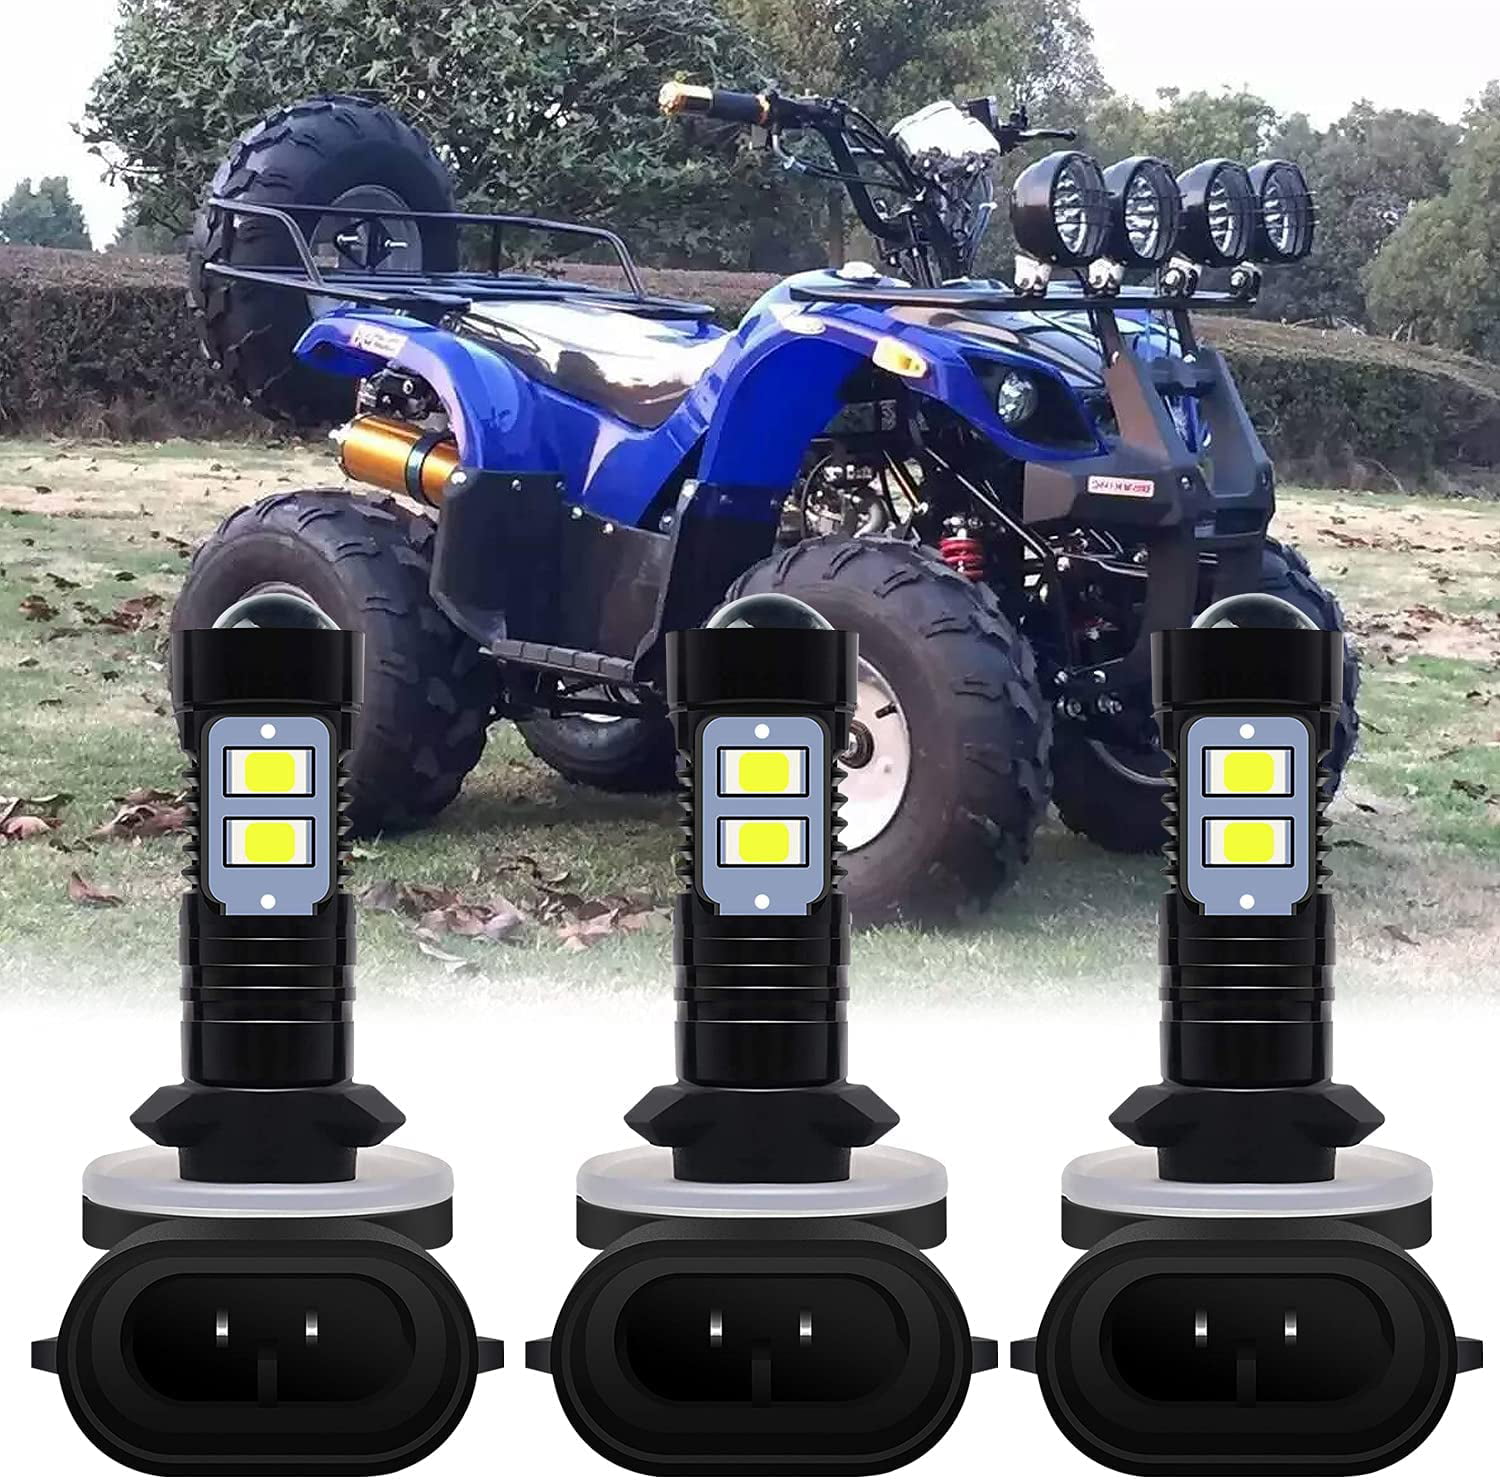 SecosAutoparts 3Pcs Upgrated LED Headlight Bulbs 270W 6000K 3600LM White Color Compatible with Polaris Sportsman 500 550 570 600 700 800 850 XP Replace 88118smd fog lights 3PCS 